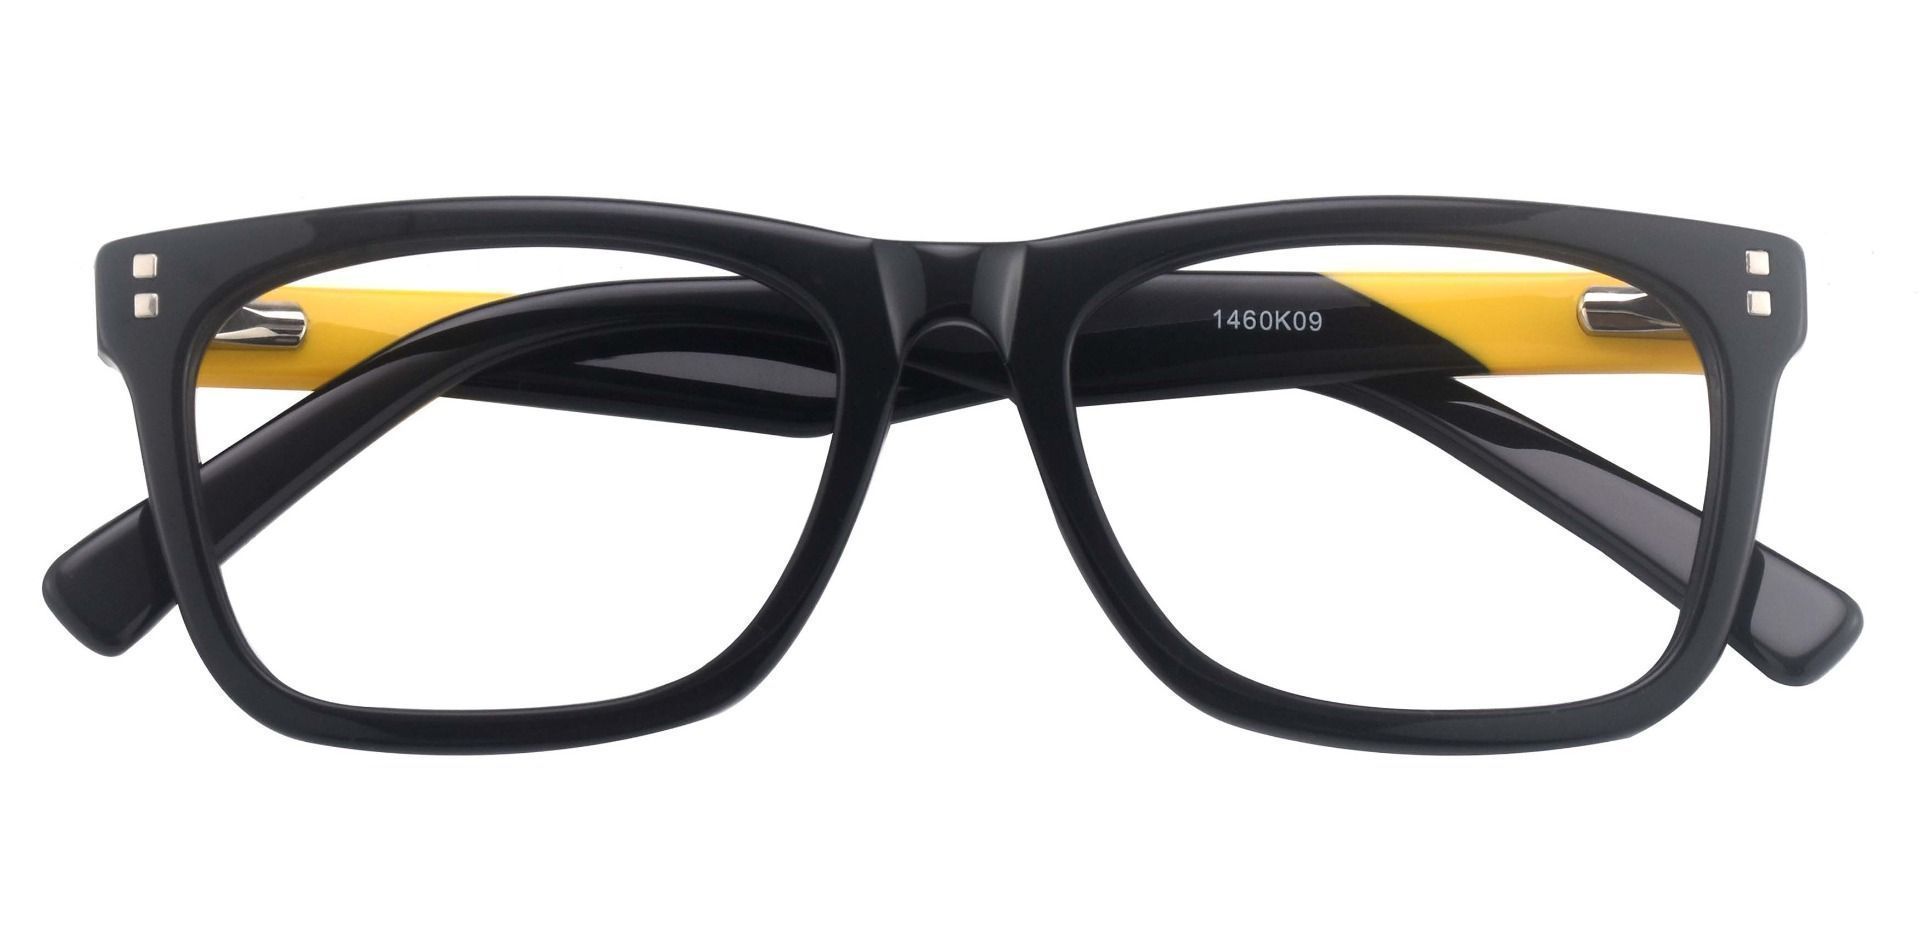 Liberty Rectangle Lined Bifocal Glasses - The Frame Is Black And Gold